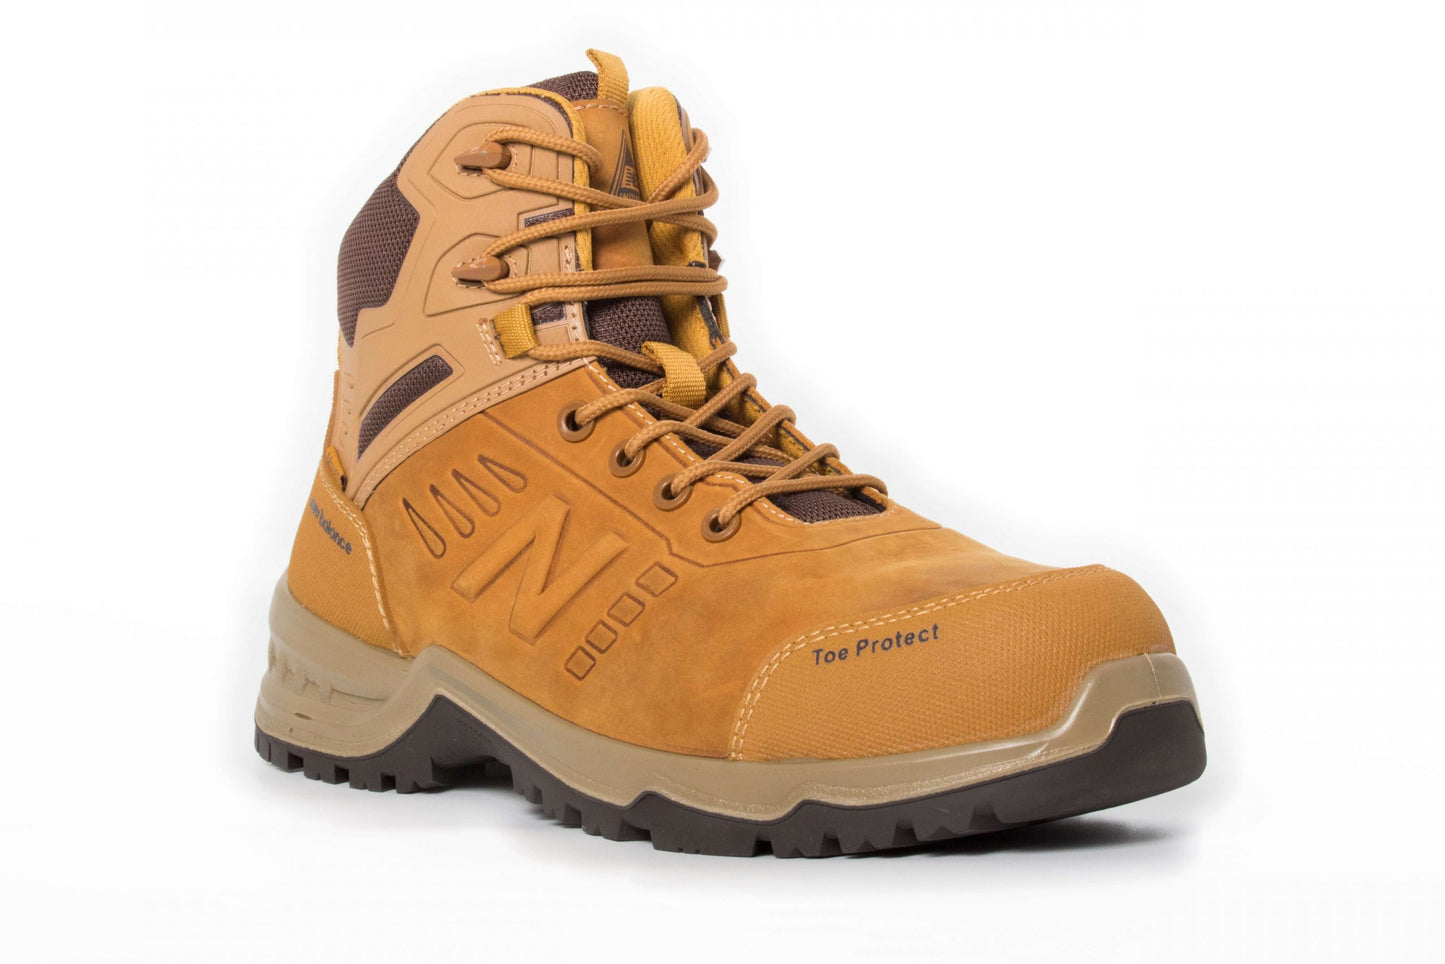 New Balance Contour - Zip Side Safety Boot